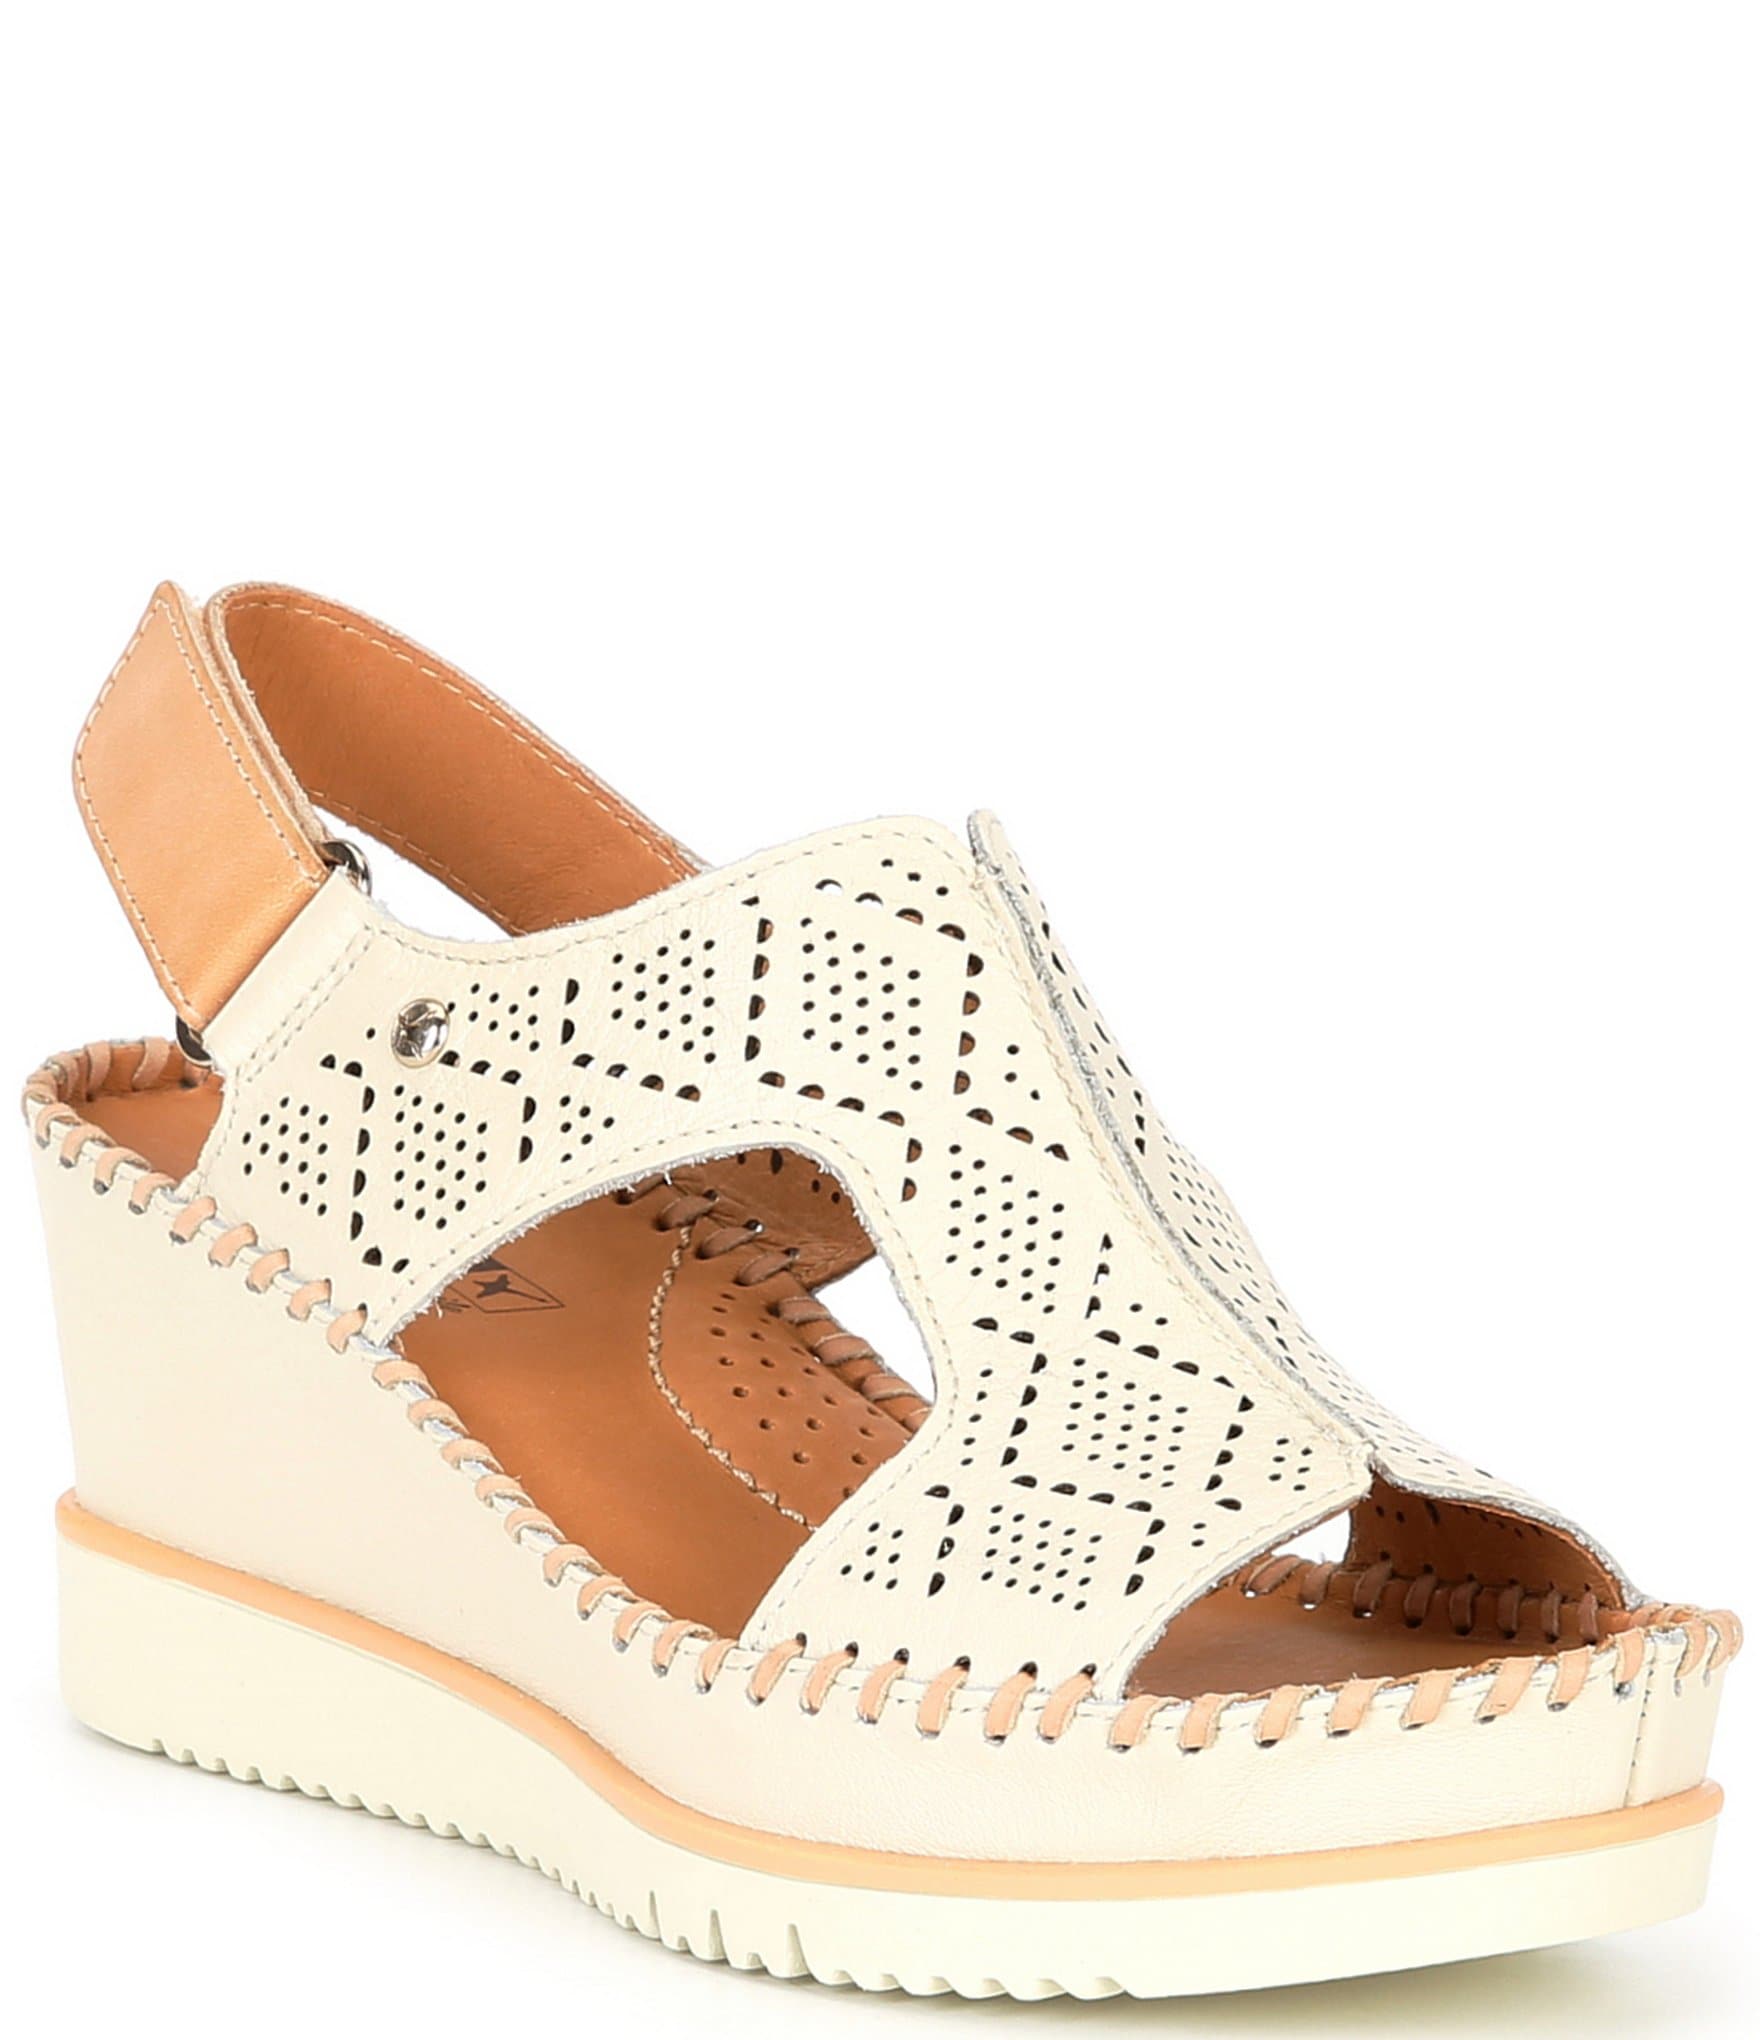 Pikolinos Aguadulce Leather Cut-out Perforated Platform Wedge Sandals ...